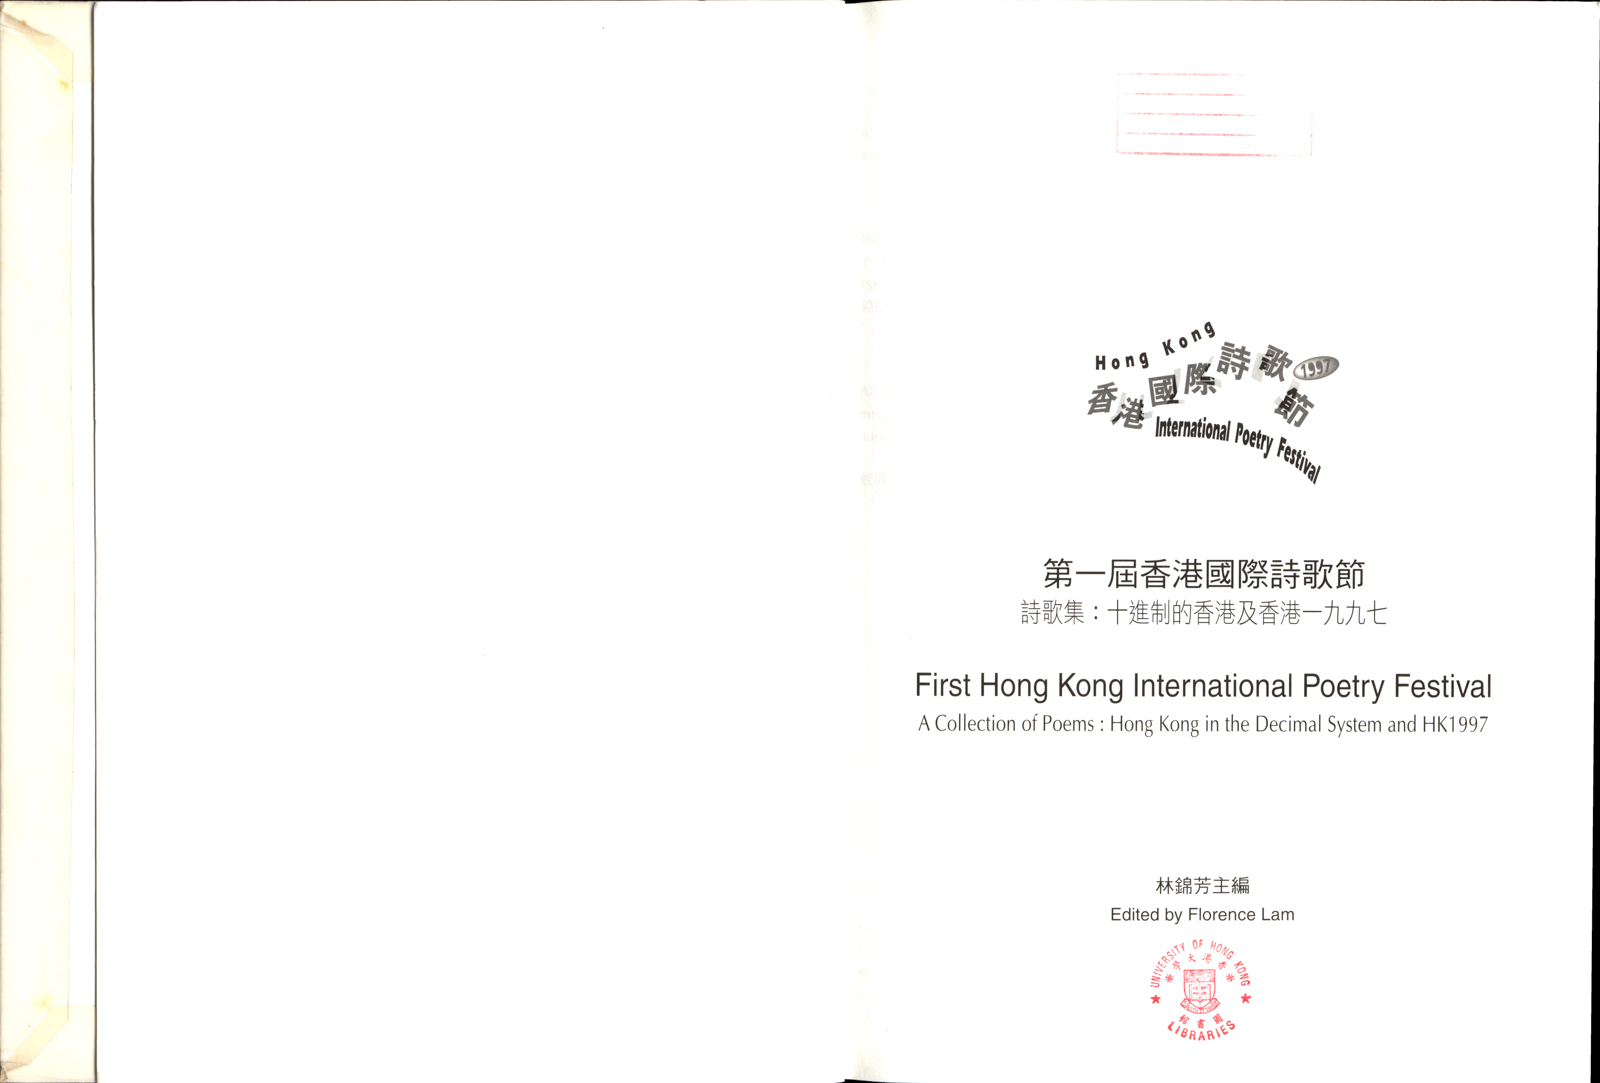 First Hong Kong International Poetry Festival - A Collection of Poems: Hong Kong in the Decimal System and HK1997